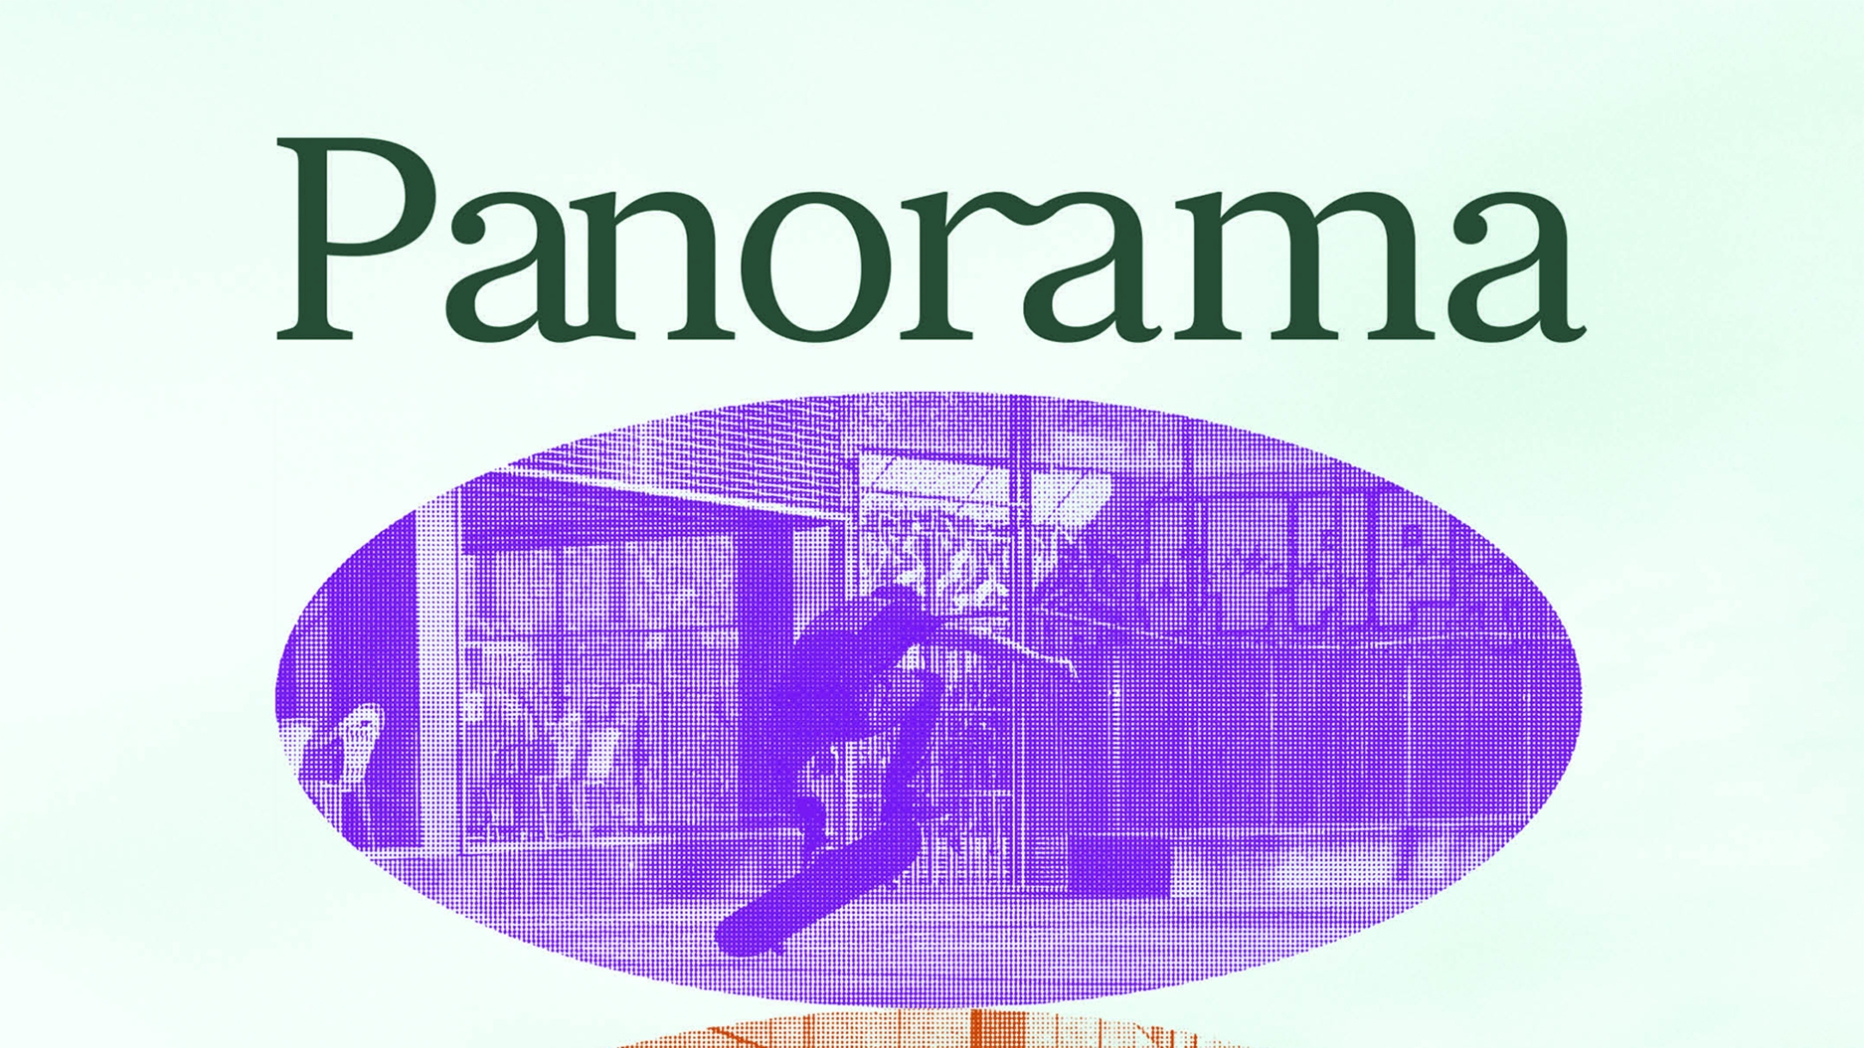 Panorama 2023 Cover. Issue Number 31, Spring 2023.